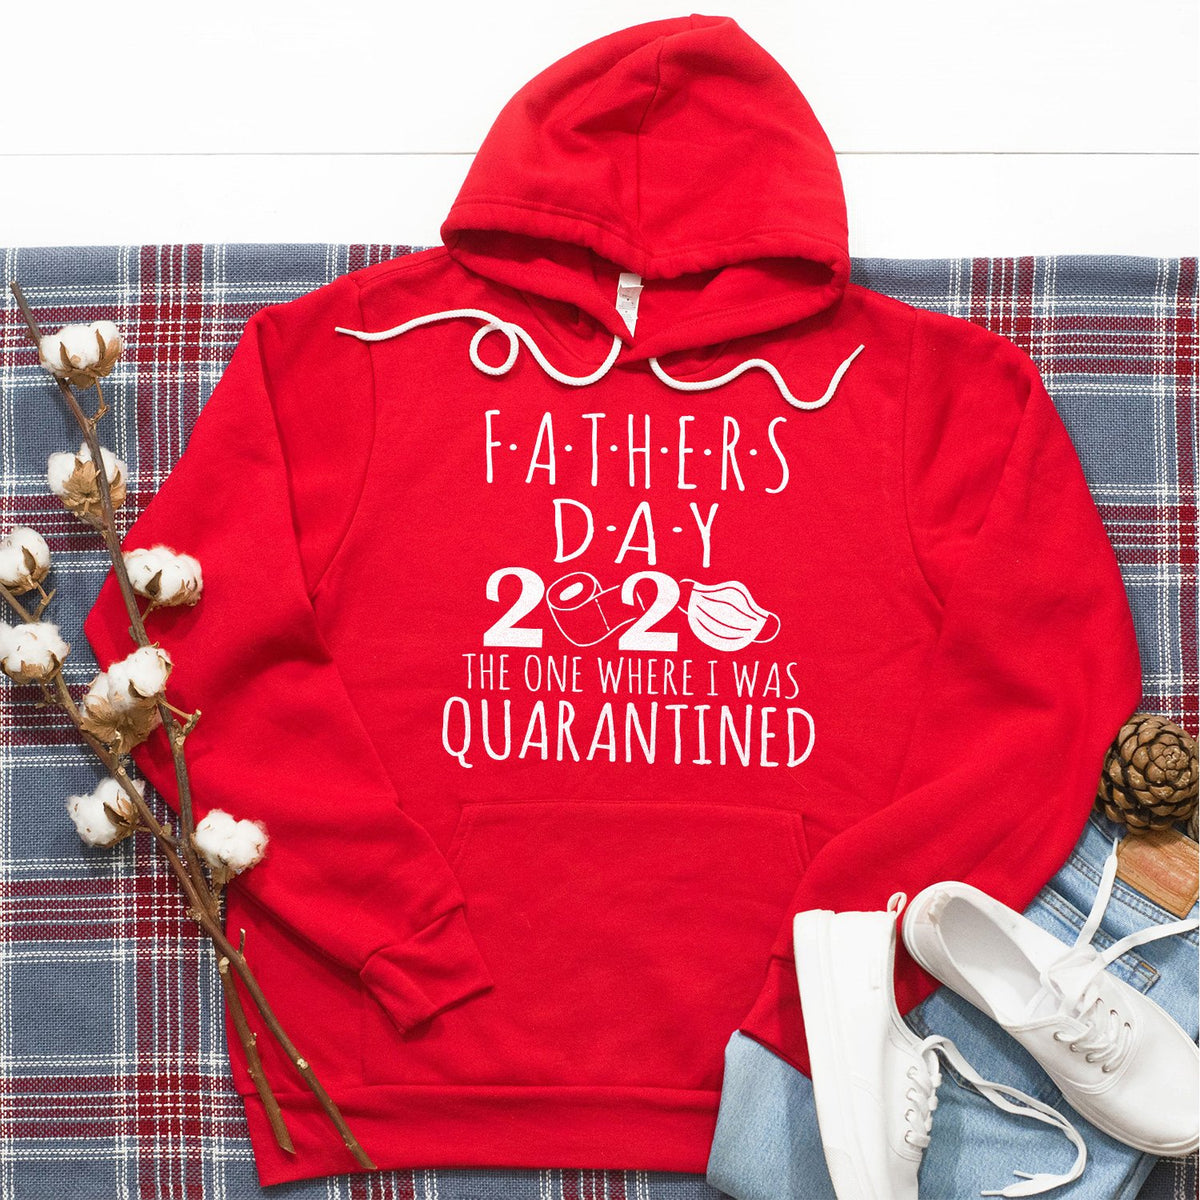 Fathers Day 2020 The One Where I Was Quarantined - Hoodie Sweatshirt